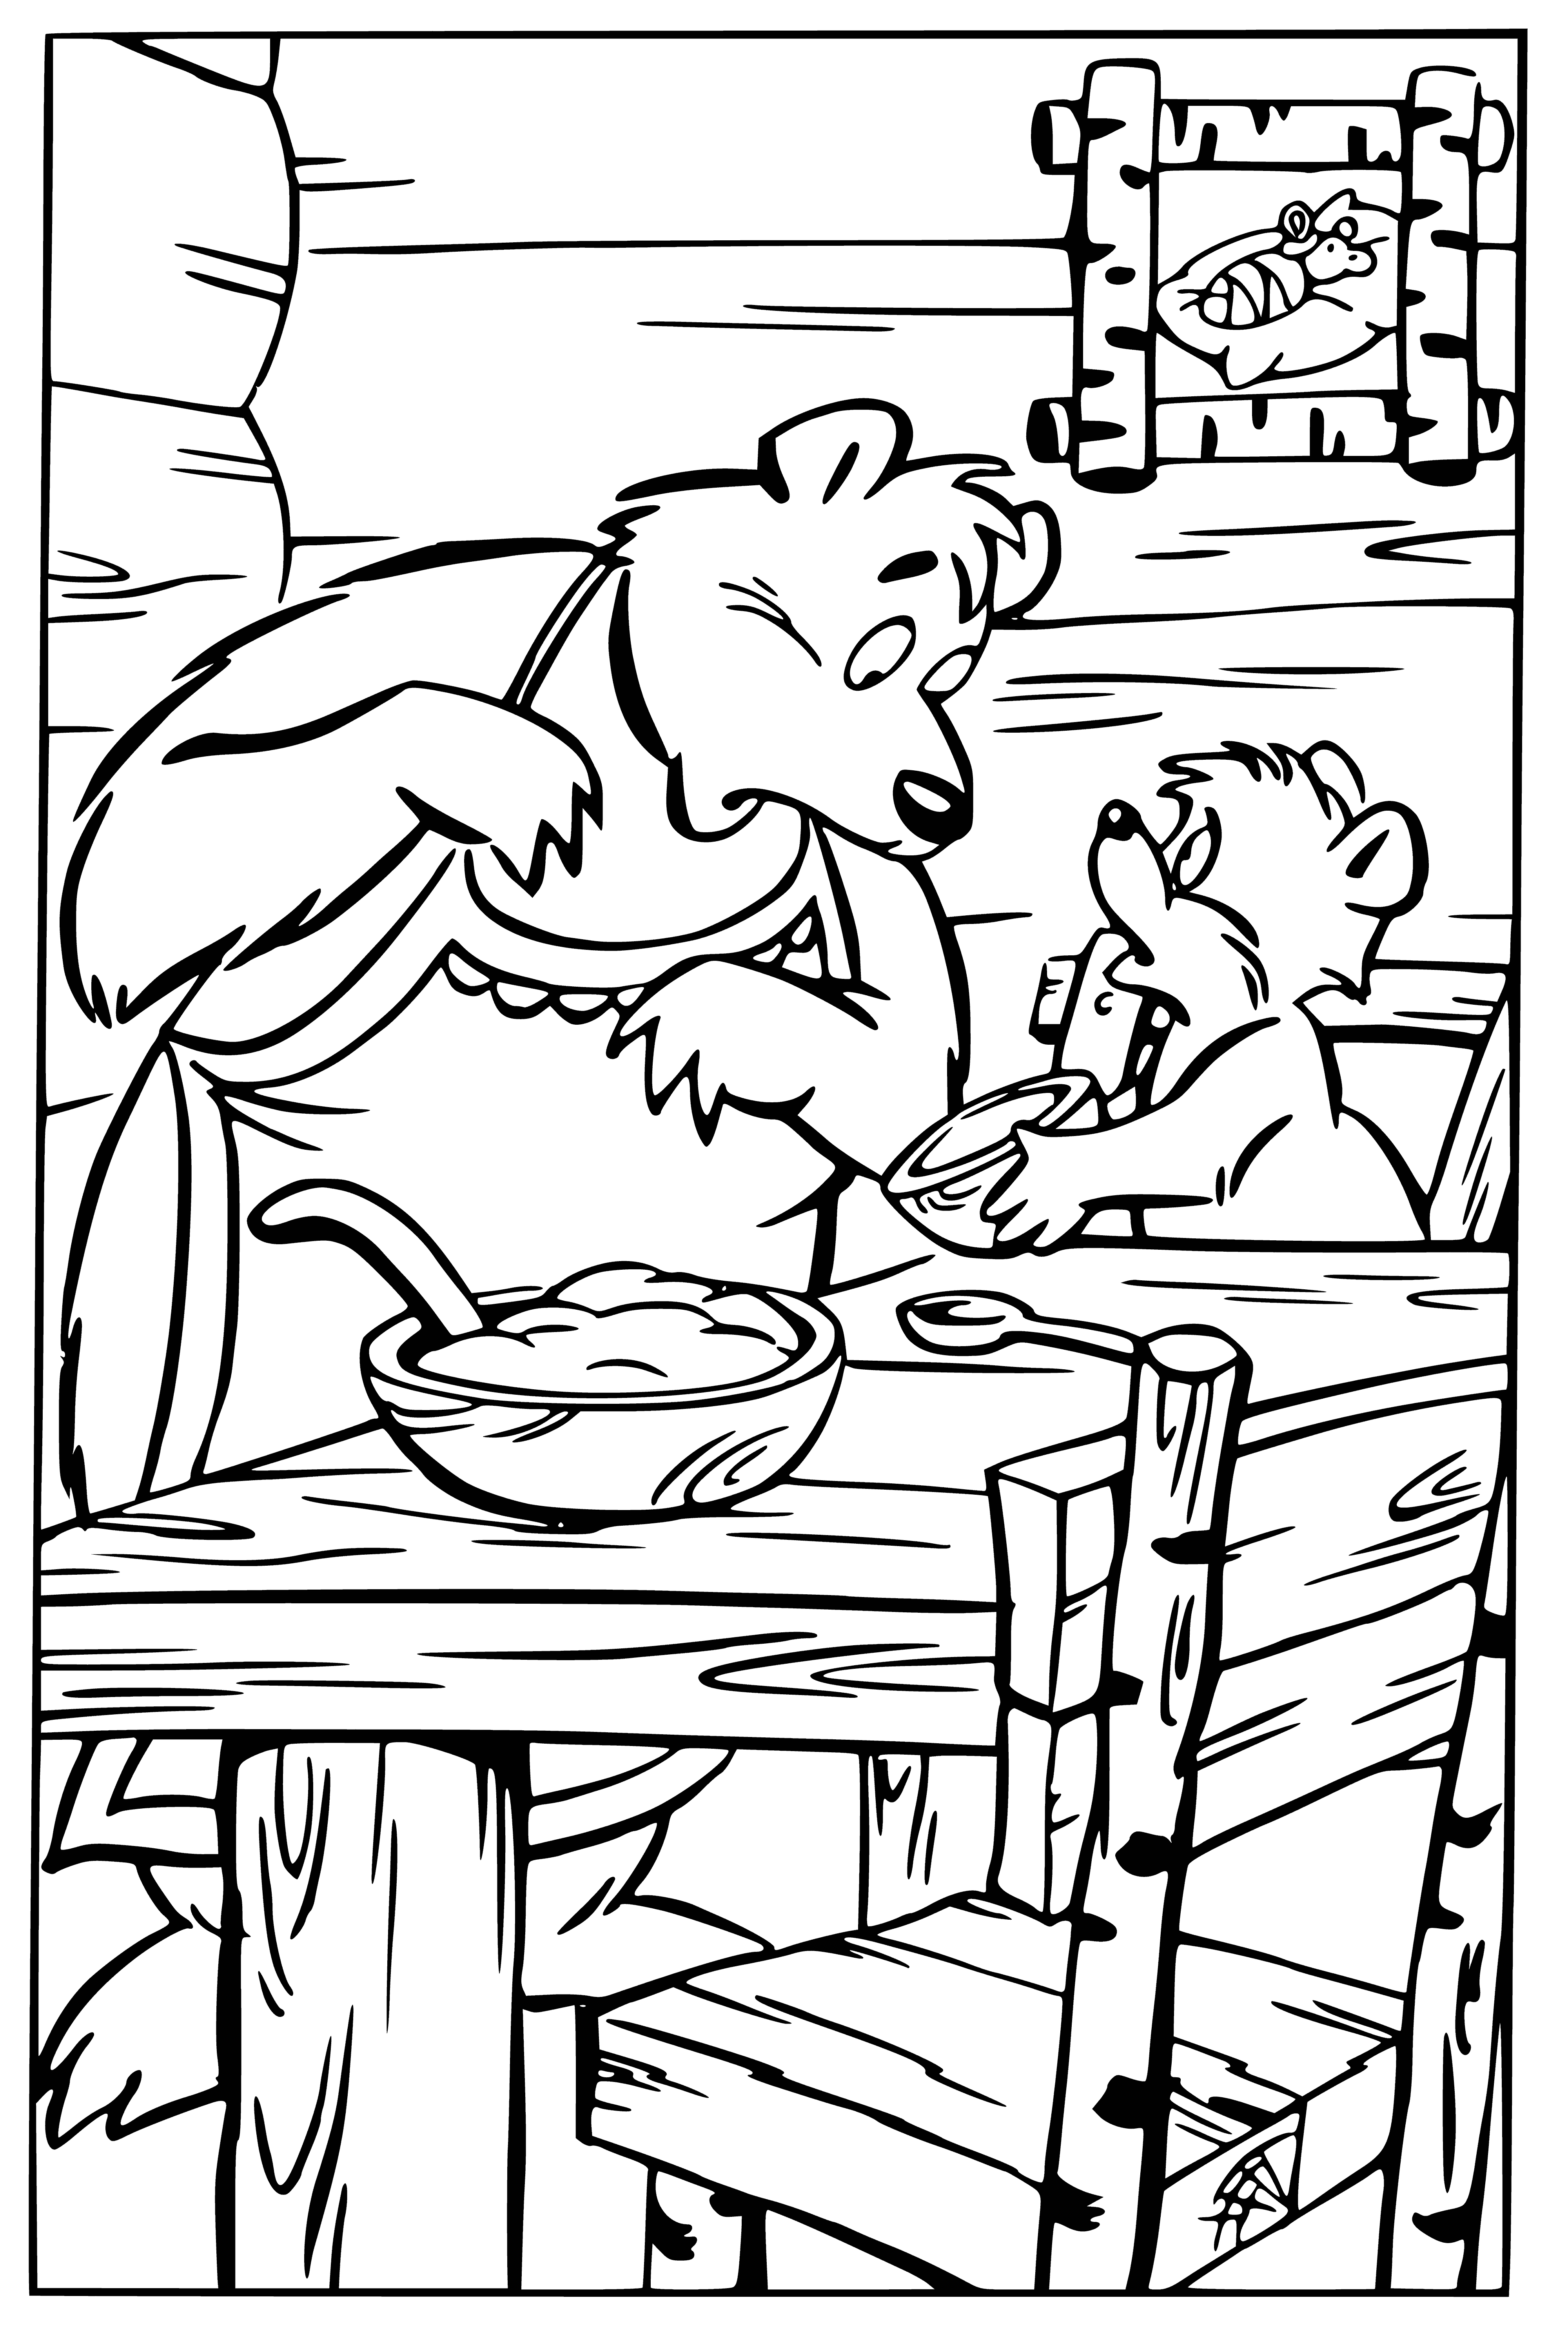 coloring page: Girl sitting at table, looking at bowl of soup. Cat nearby watching her with spoon in hand.